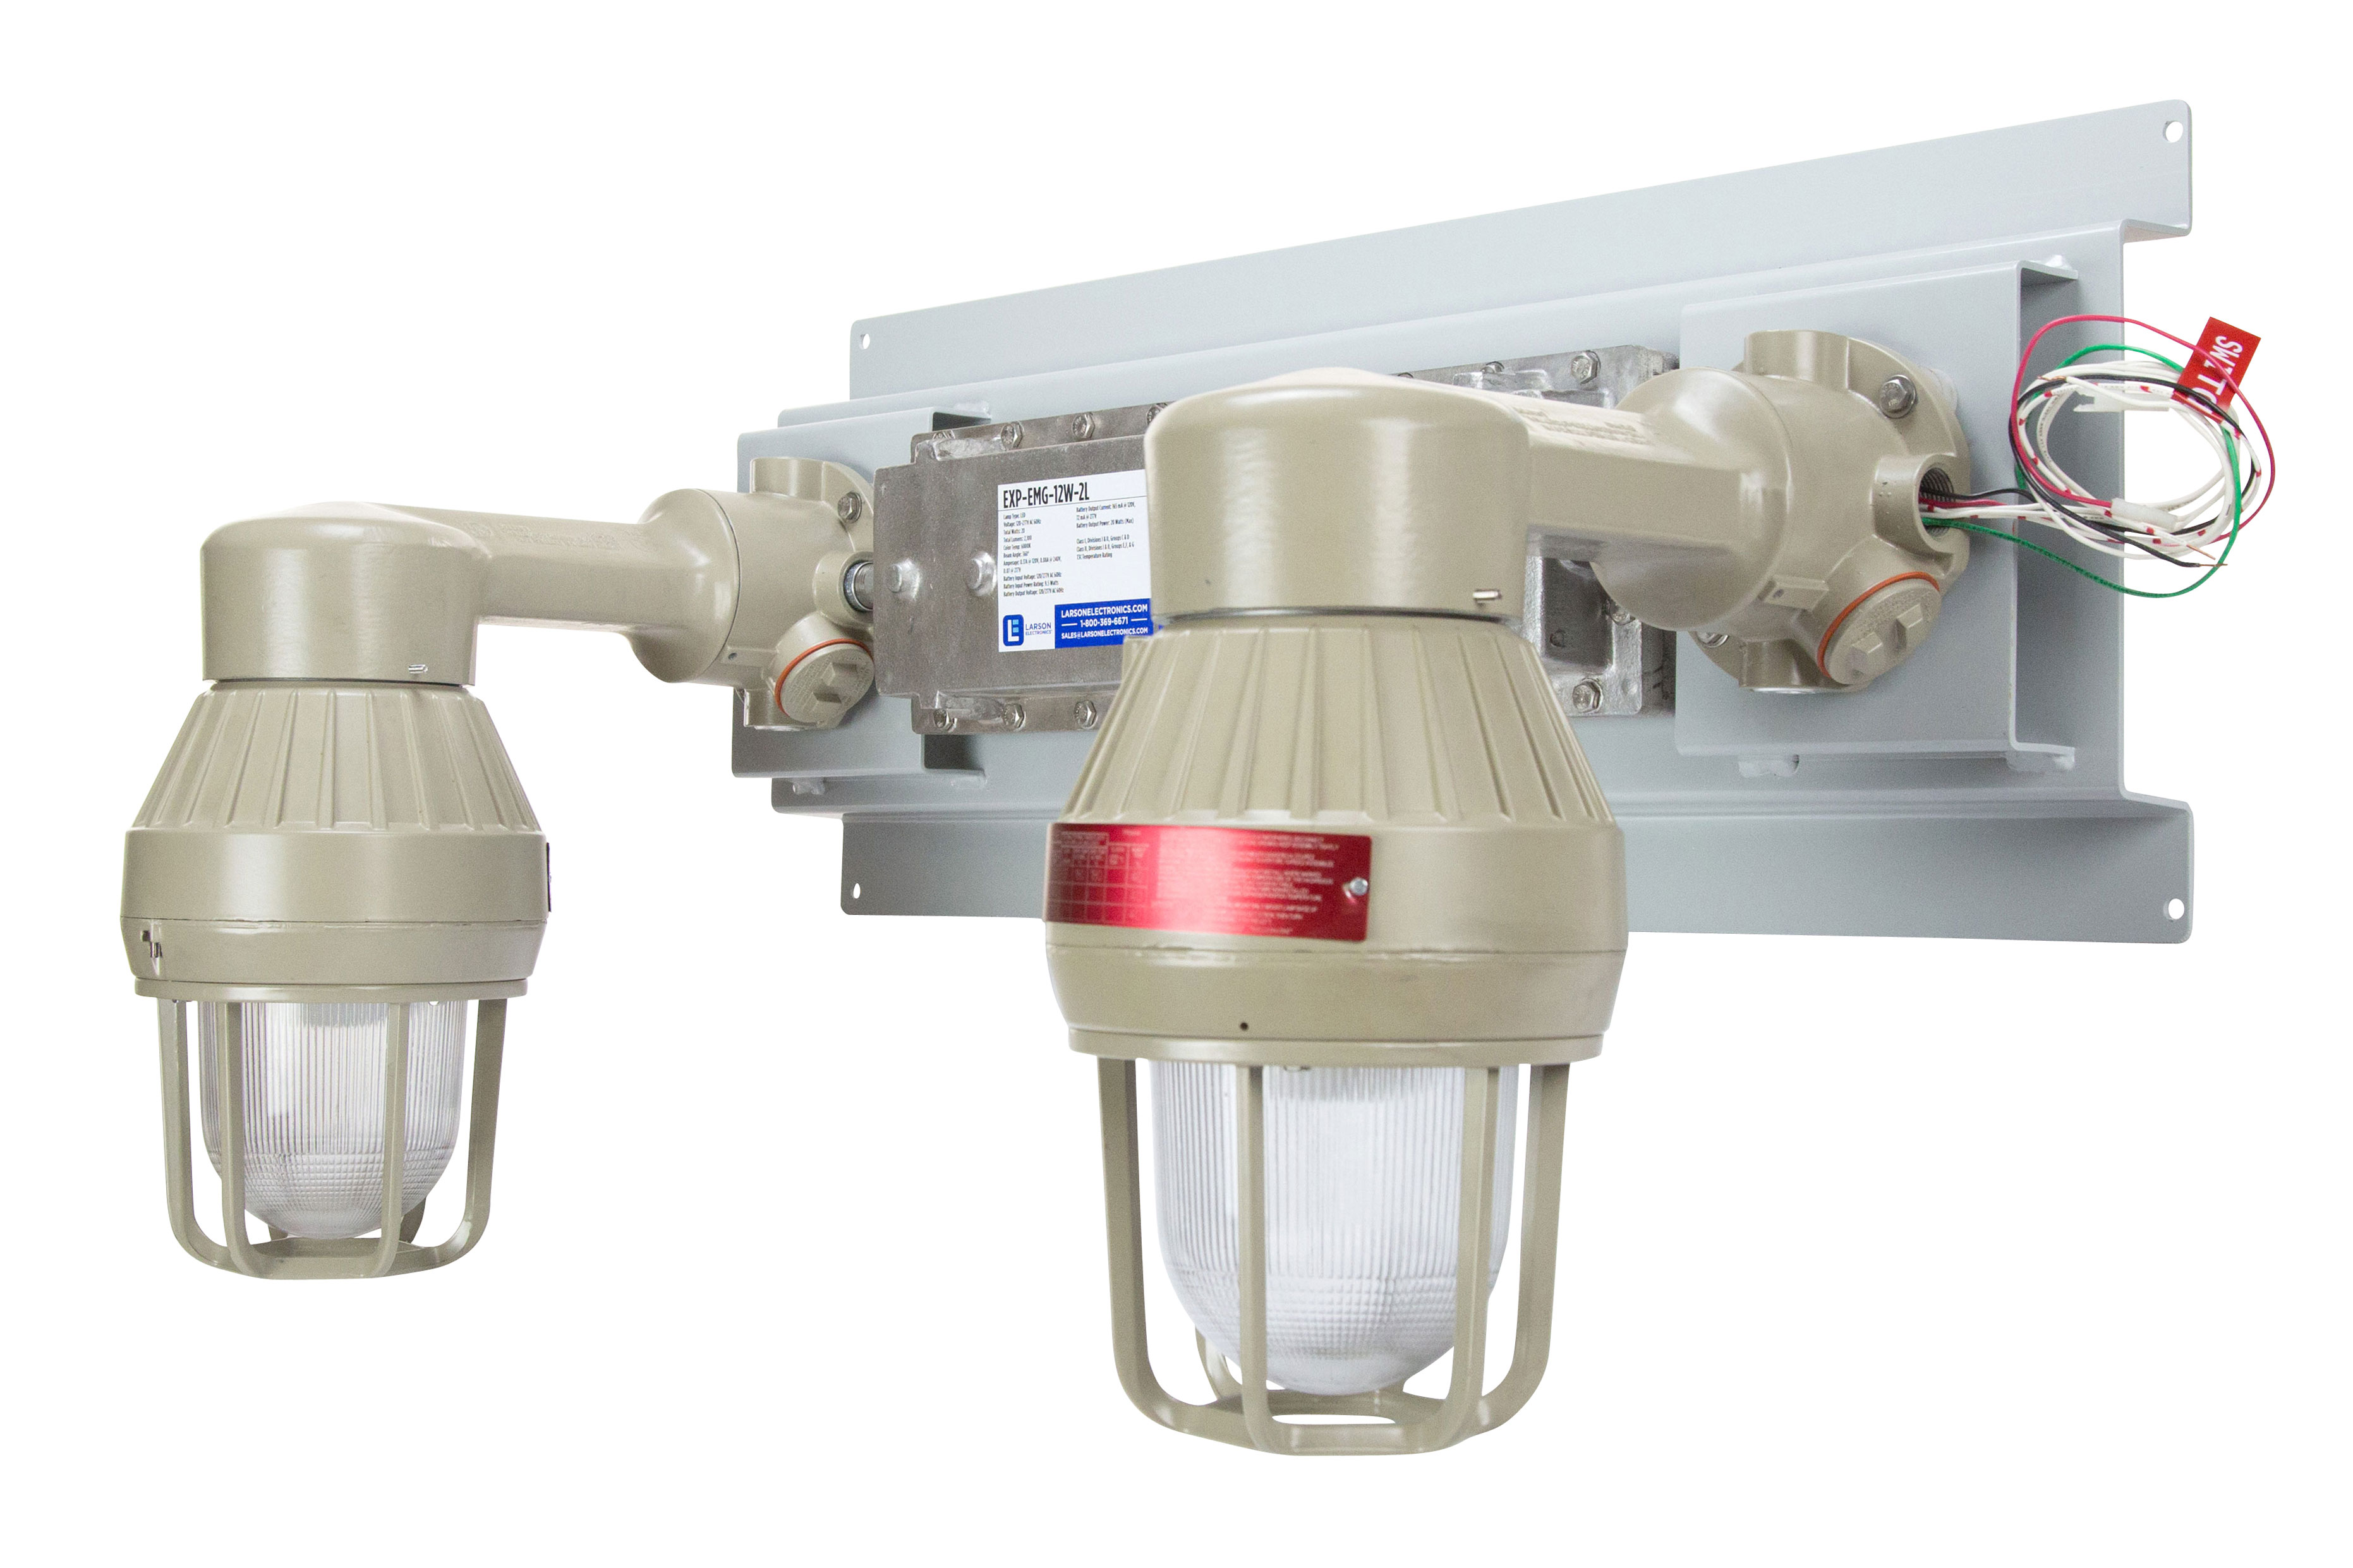 Class 1 Division 1 Emergency Lighting System with LED units